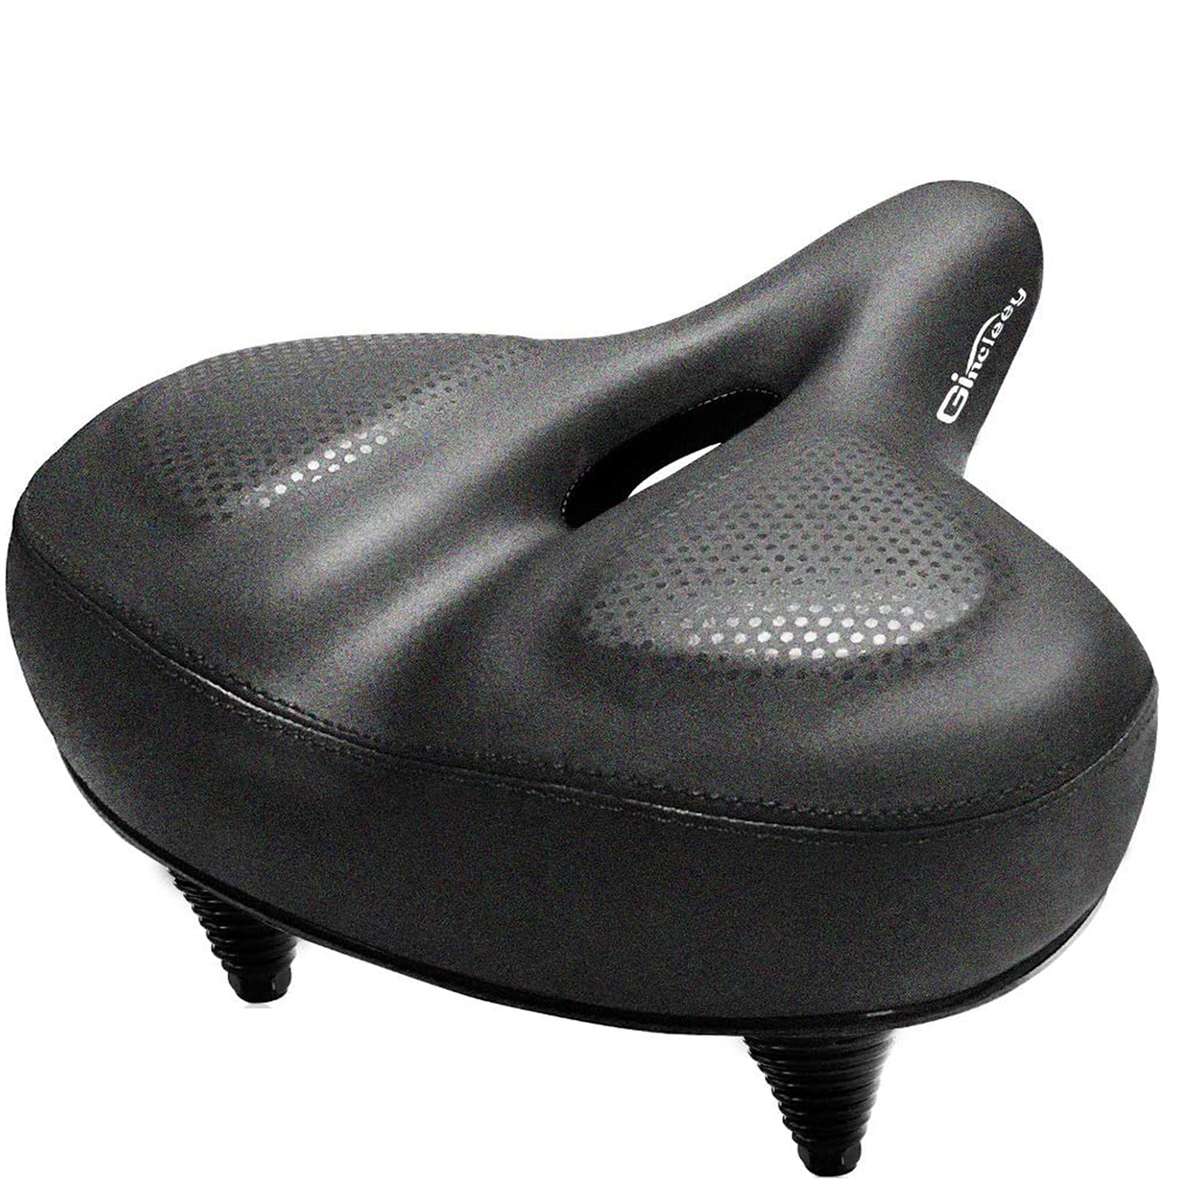 Most Comfortable Bicycle Seat